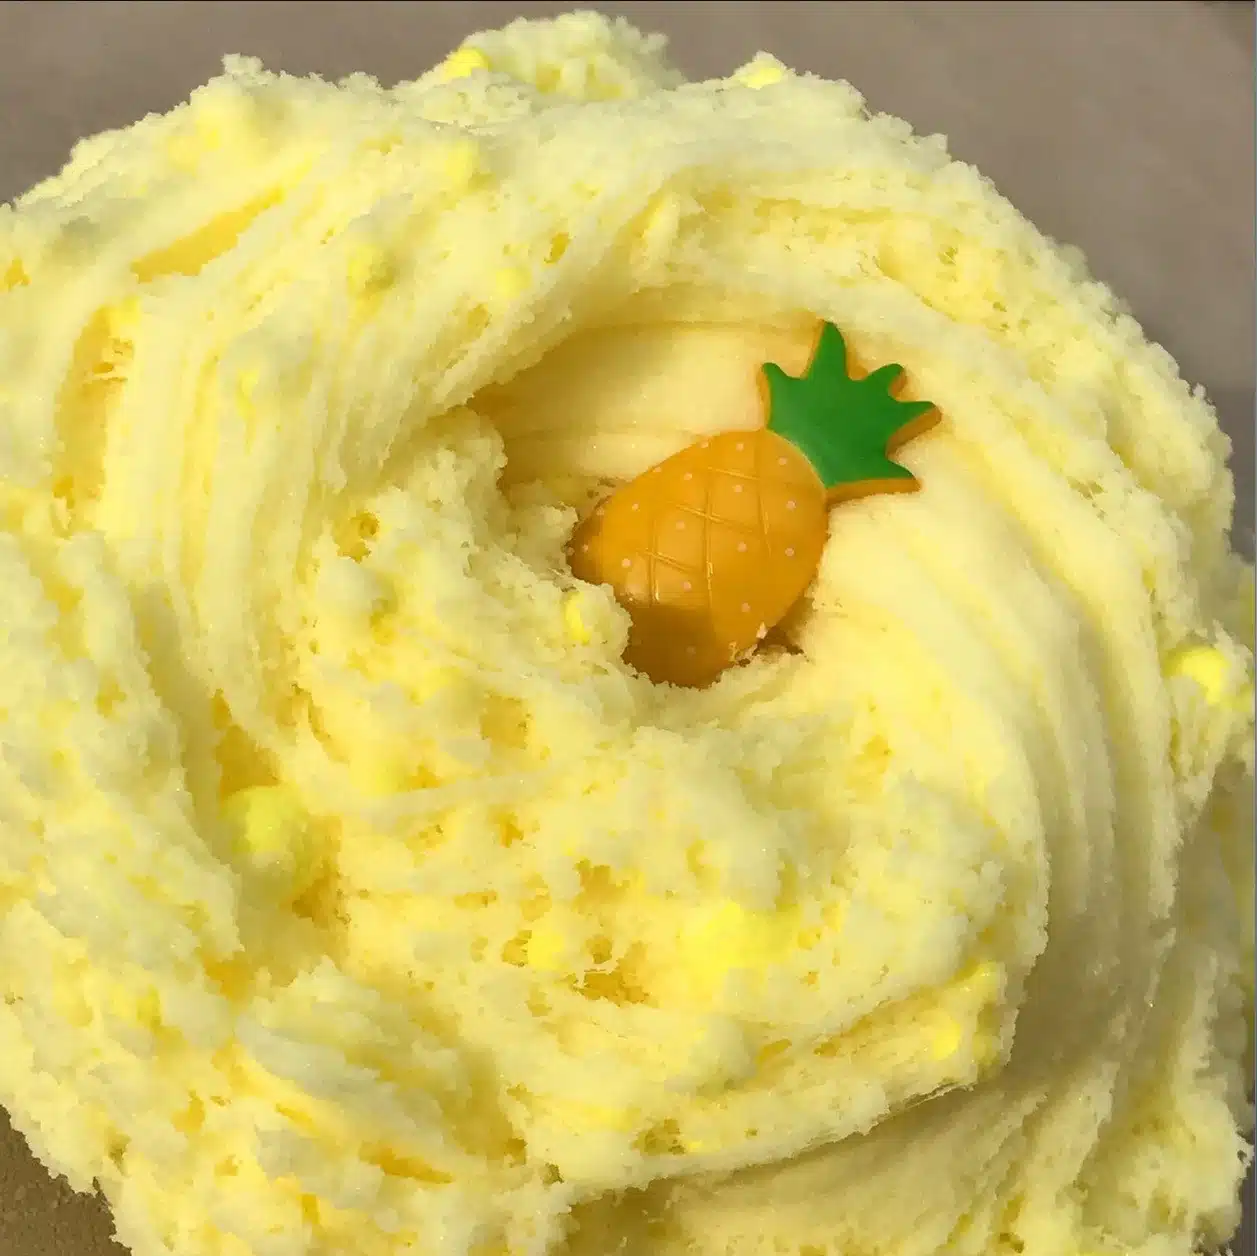 The image showcases a close-up of a swirled yellow confection, possibly a cloud dough slime, with a small, decorative pineapple-shaped piece nestled in the center.